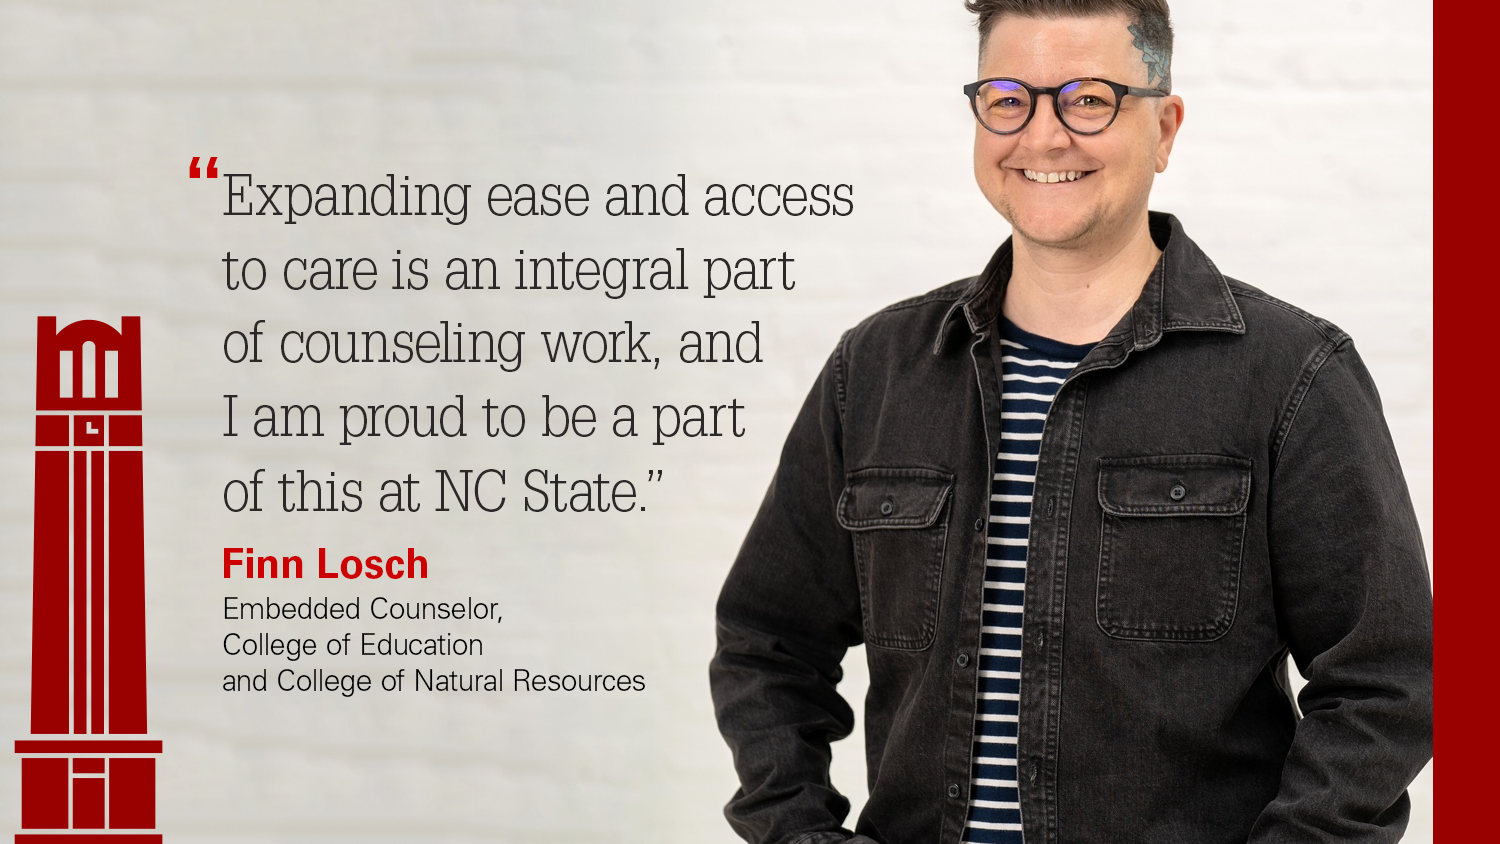 Finn Losch is the new embedded counselor with the colleges of Education and Natural Resourcces